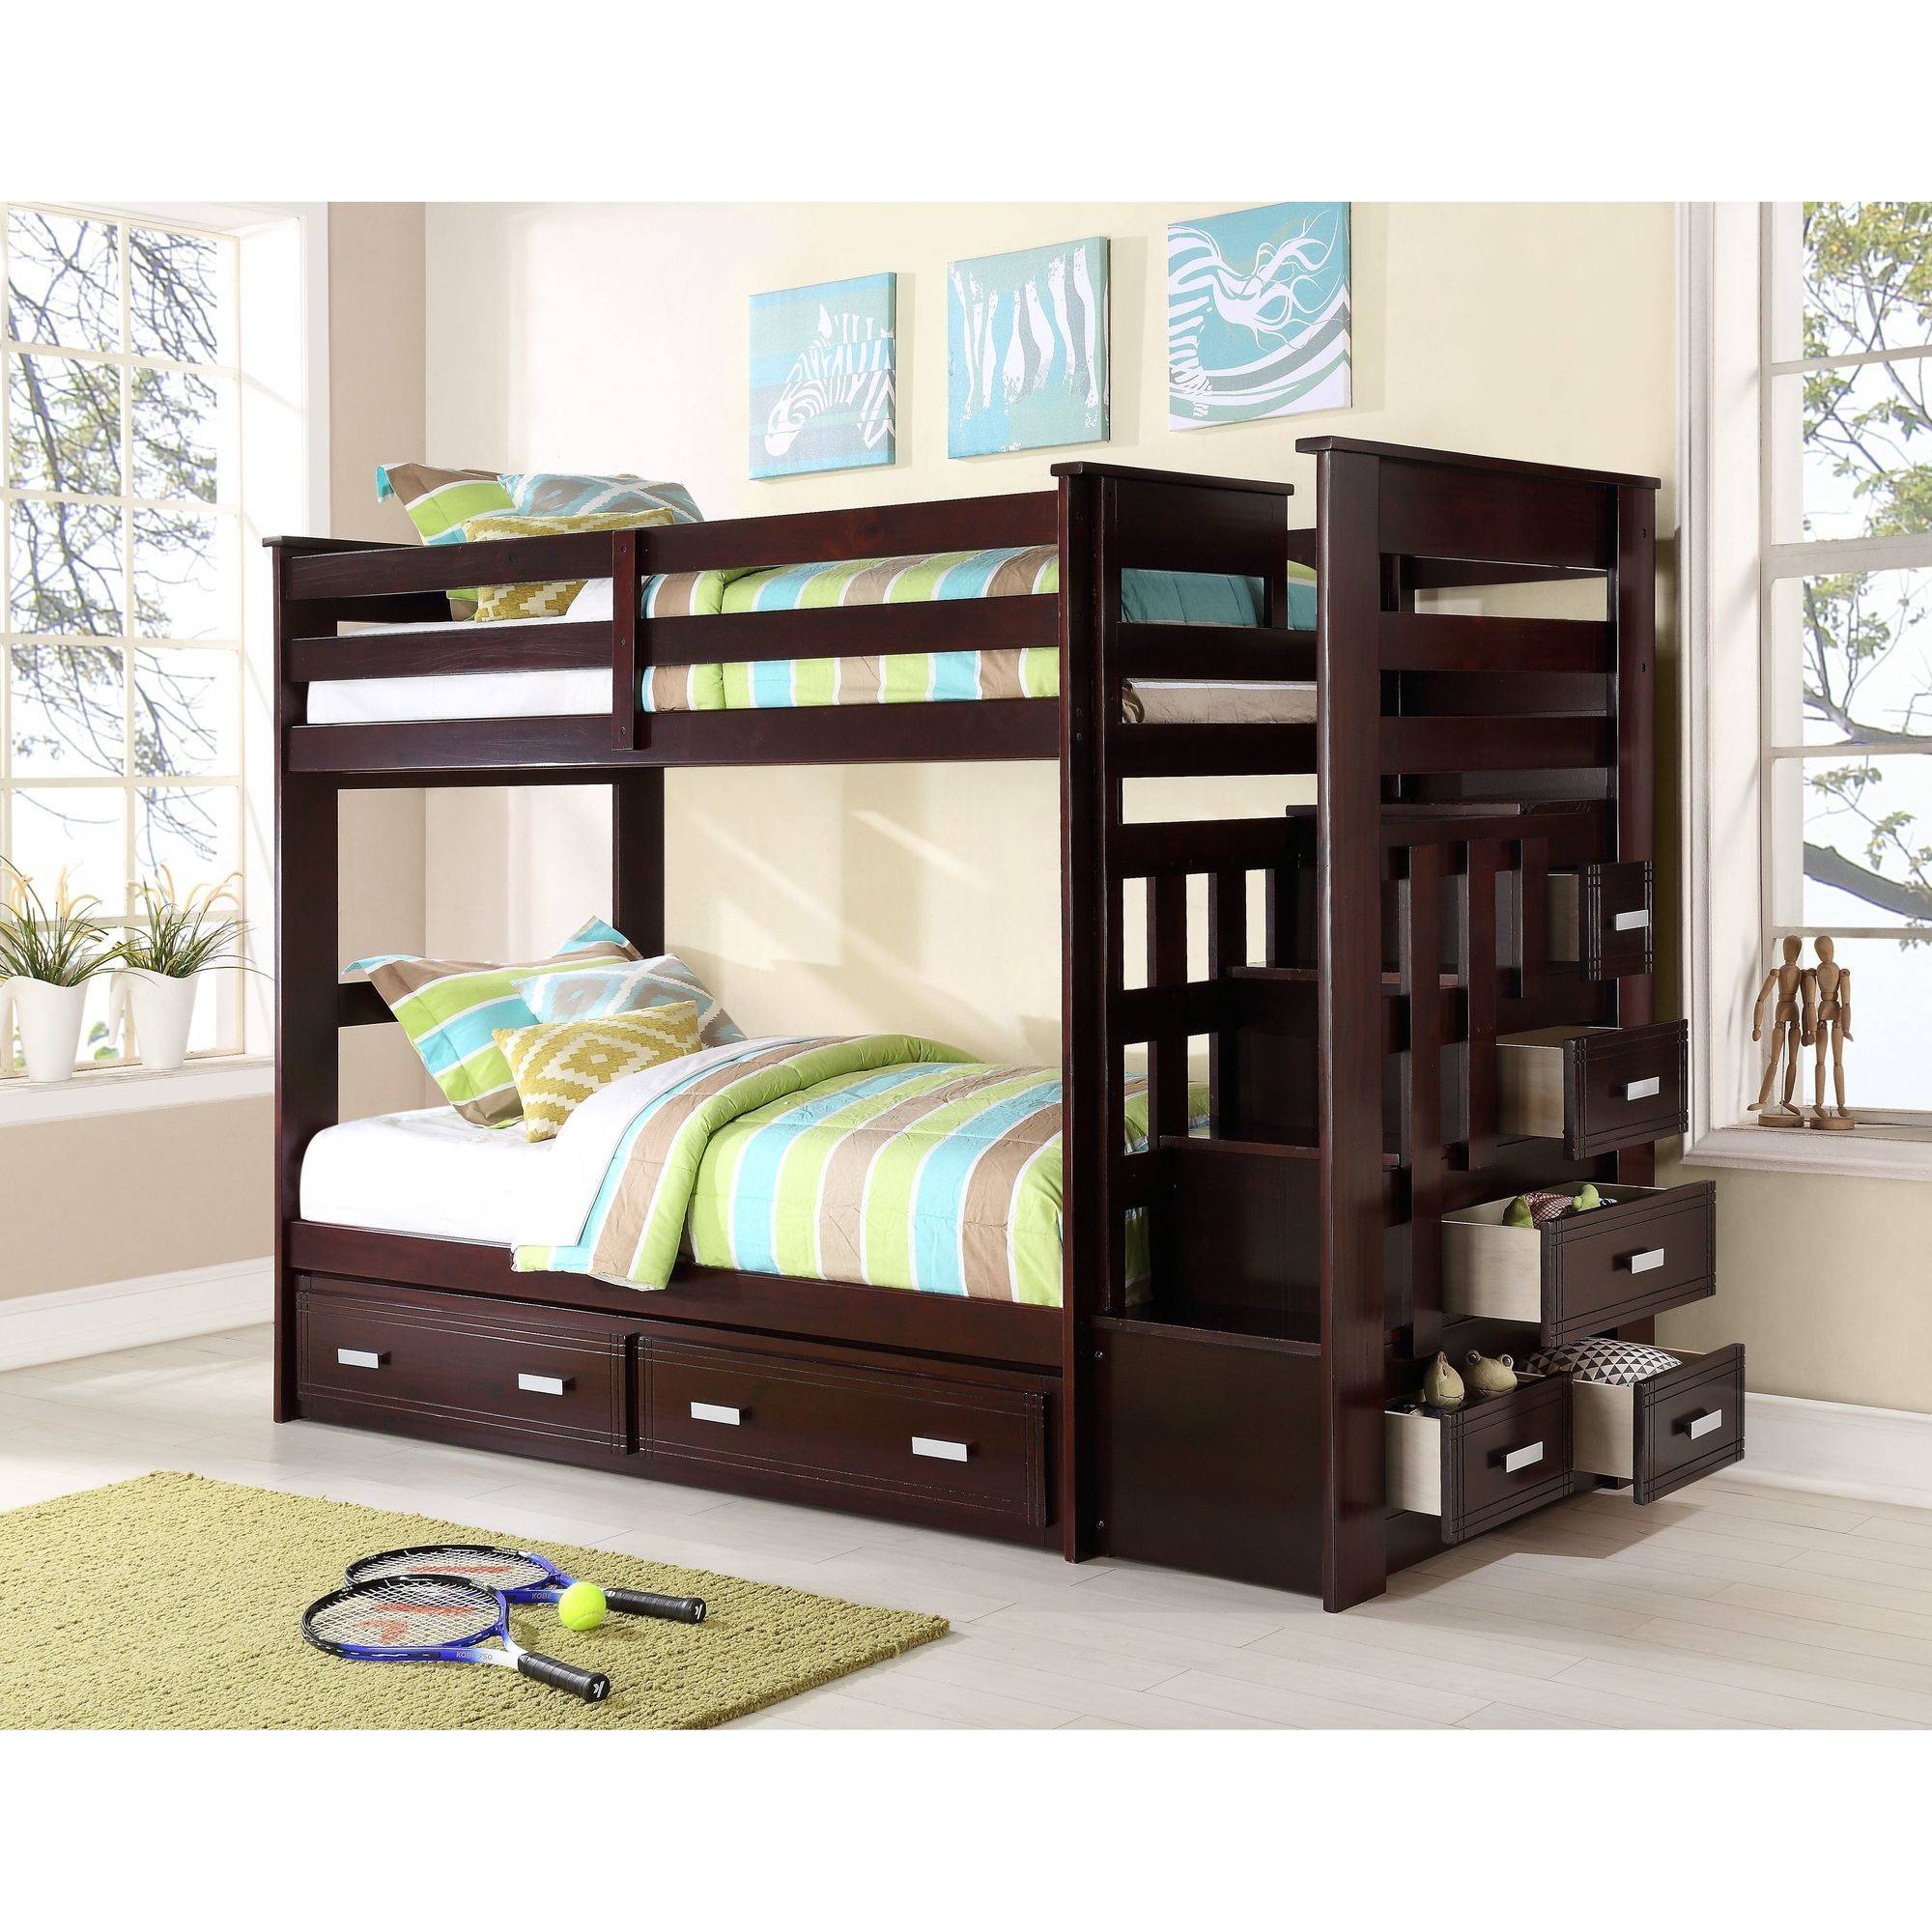 Allentown Twin over Twin Bunk Bed, Espresso - image 4 of 5